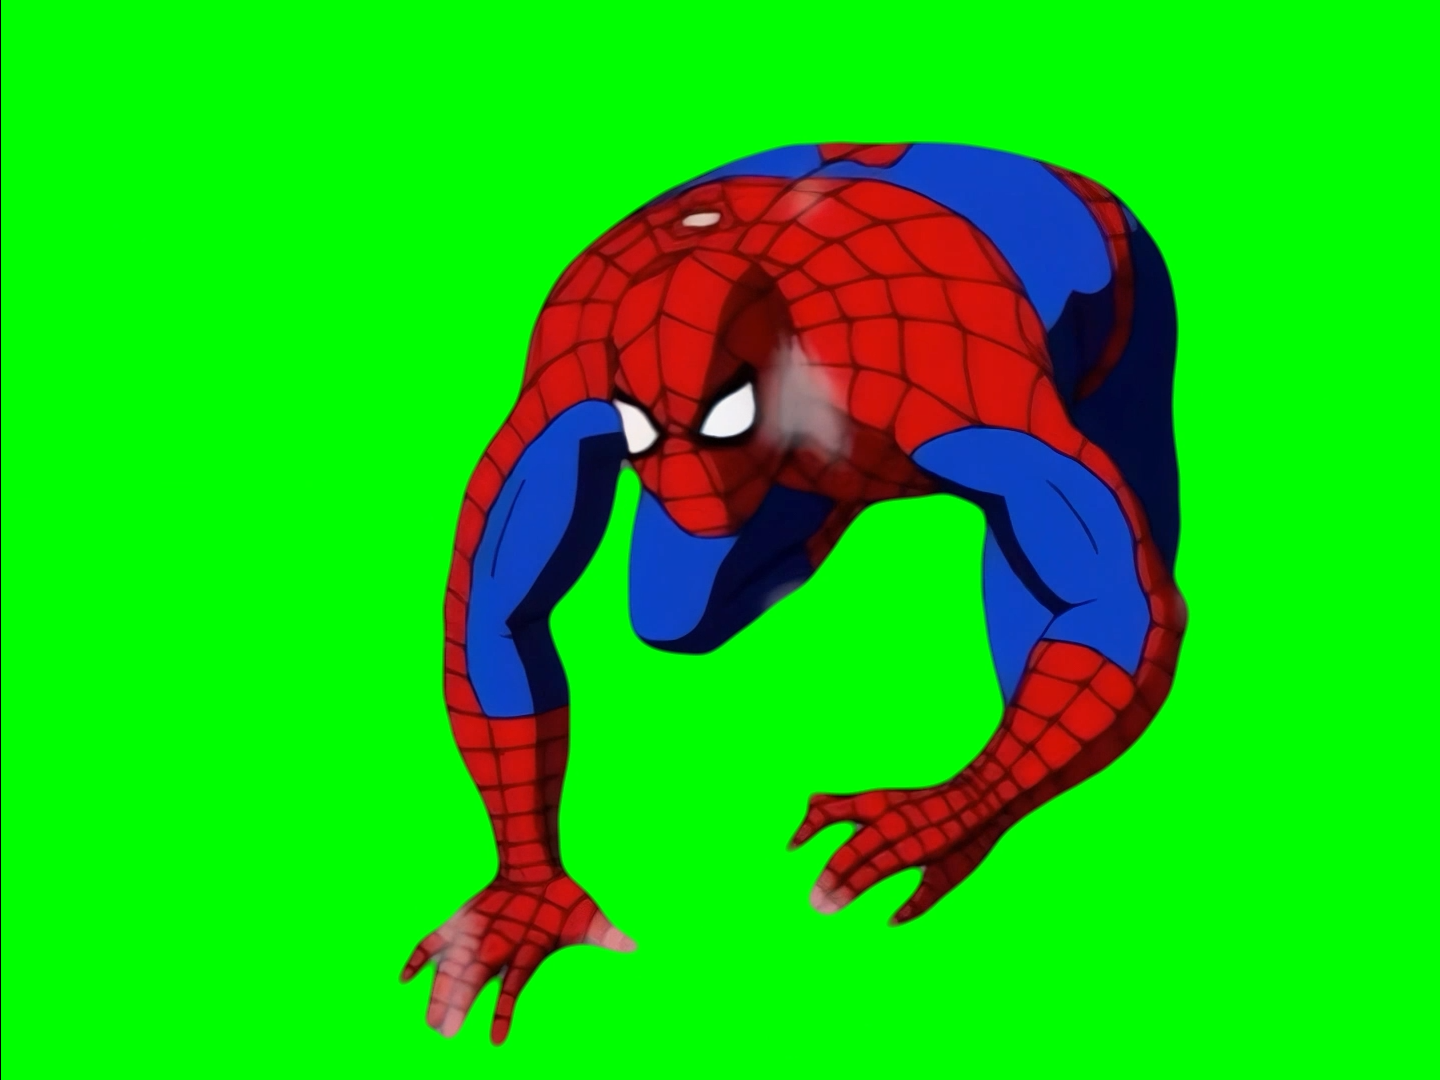 Spider-Man screaming NOOO! - Spider-Man The Animated Series (Green Screen)